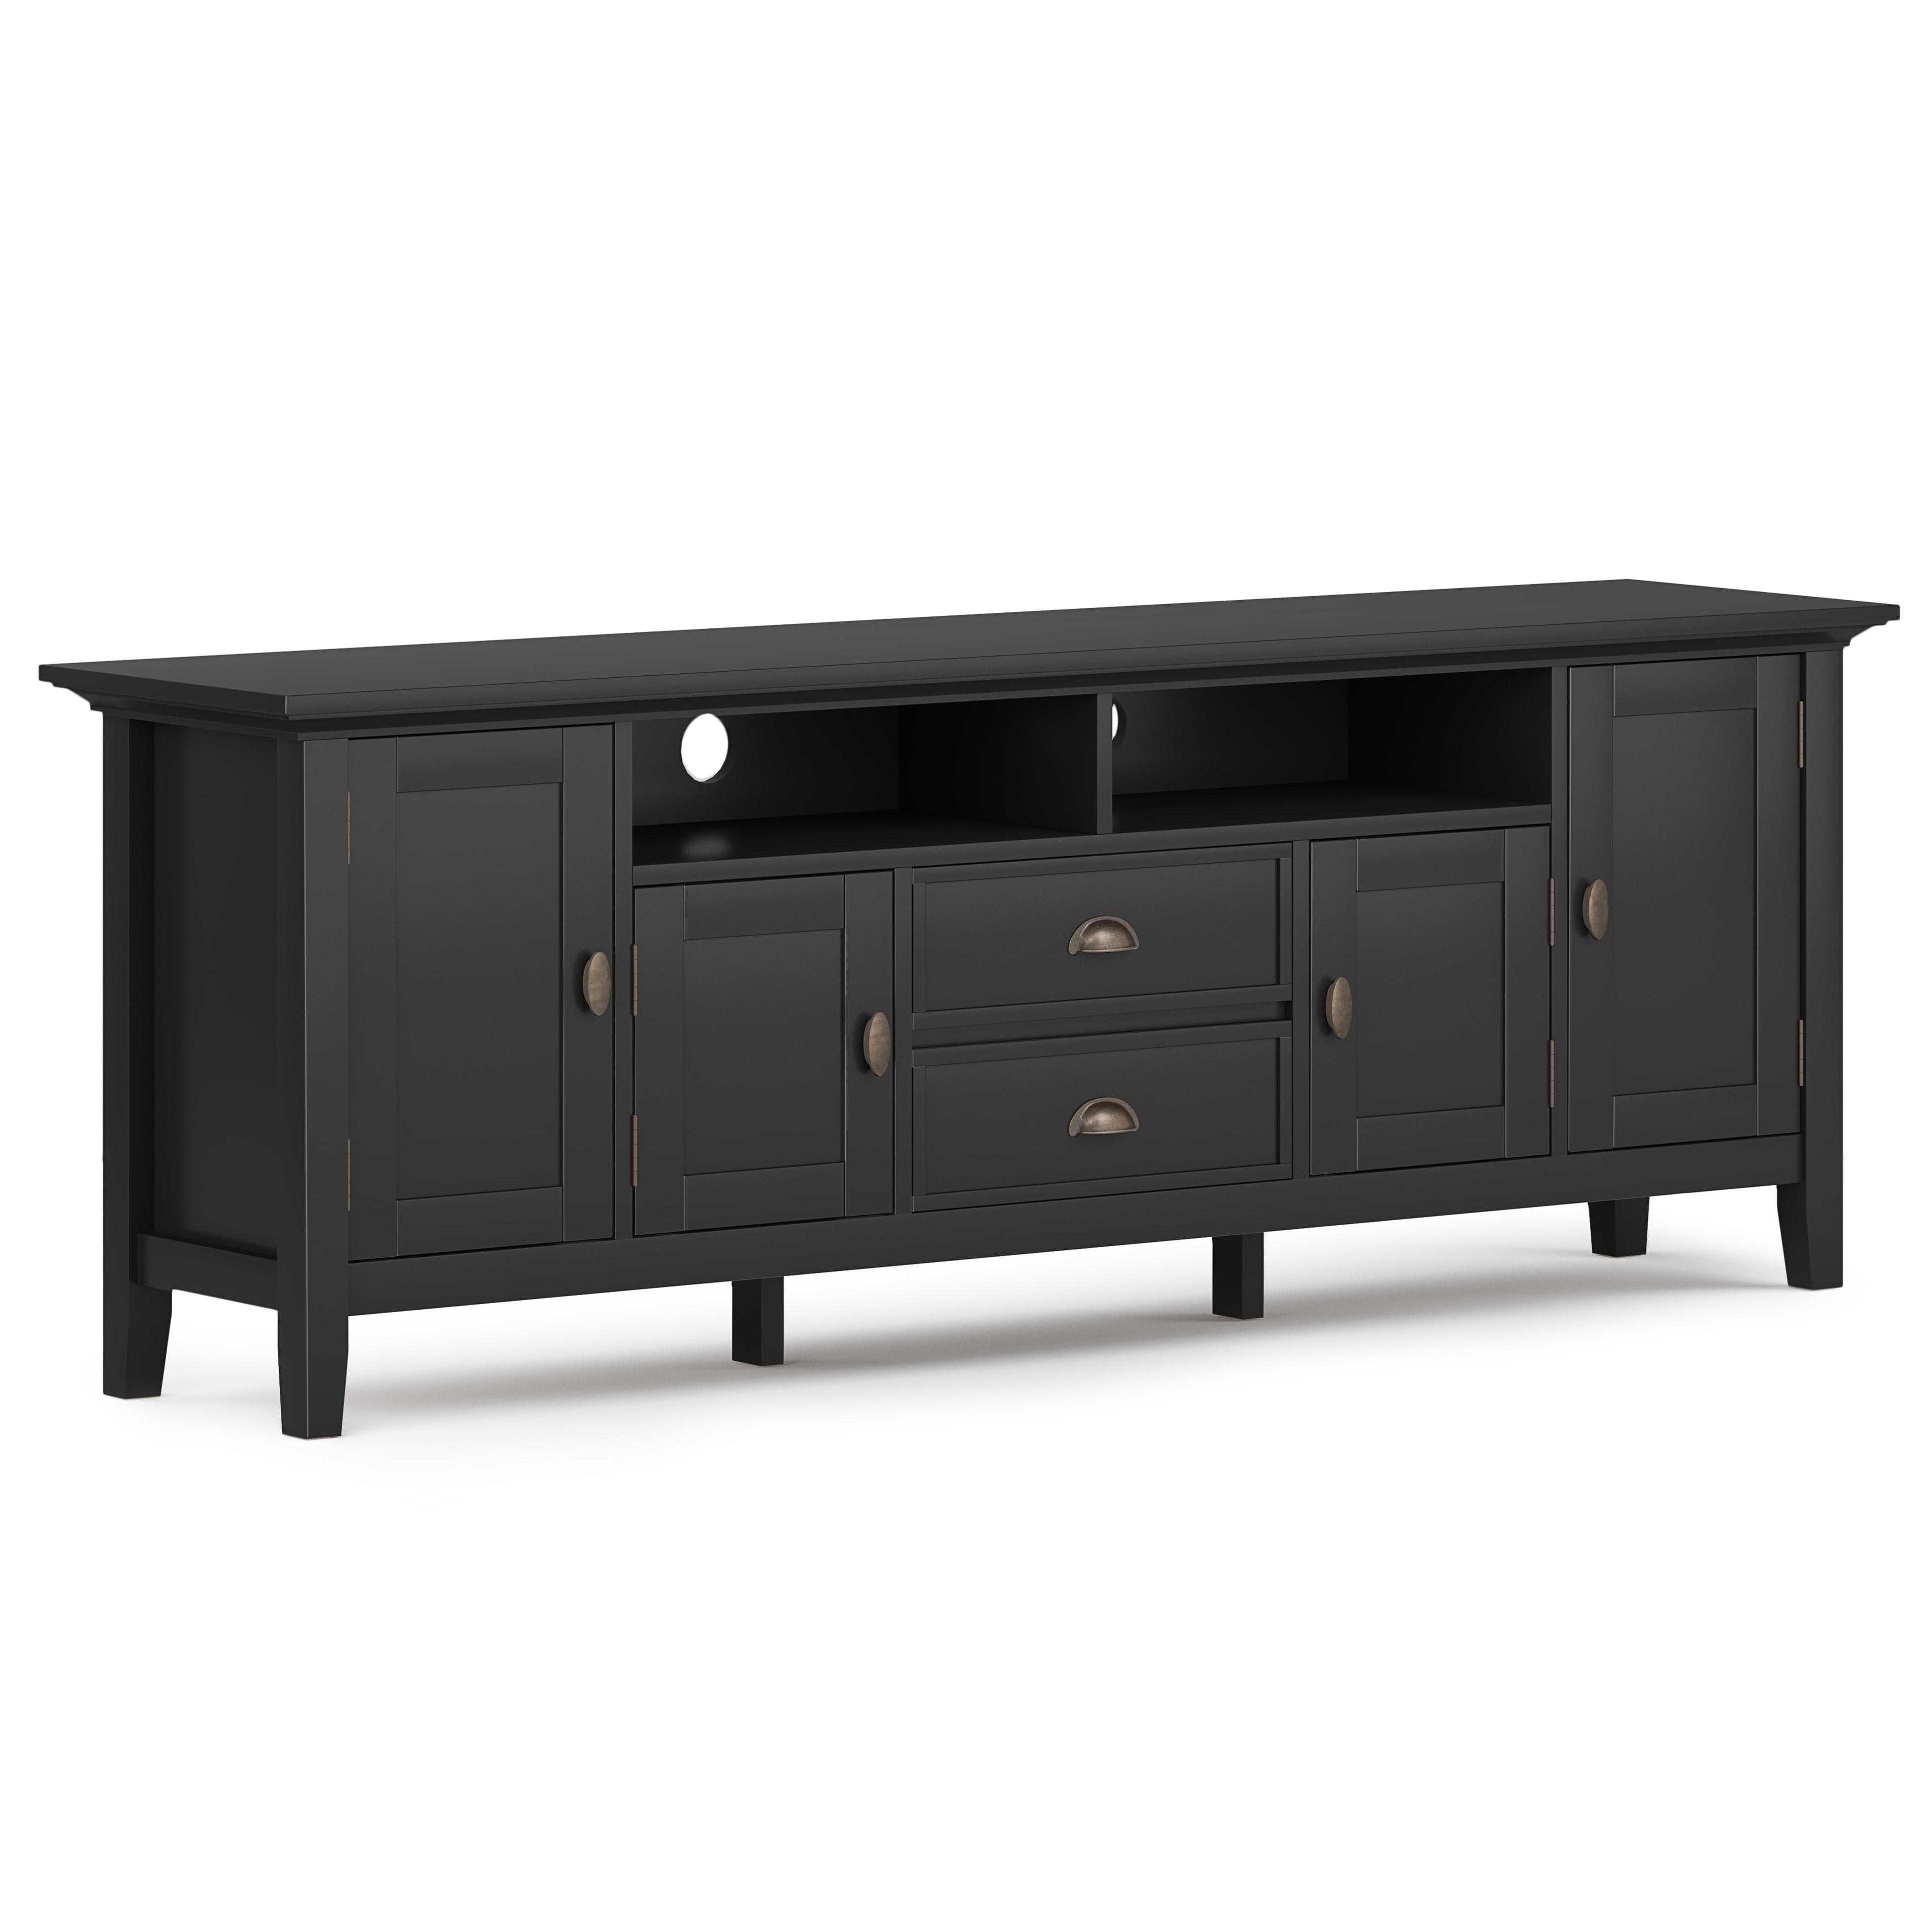 Redmond Black Solid Wood 72" TV Media Stand with Cabinets